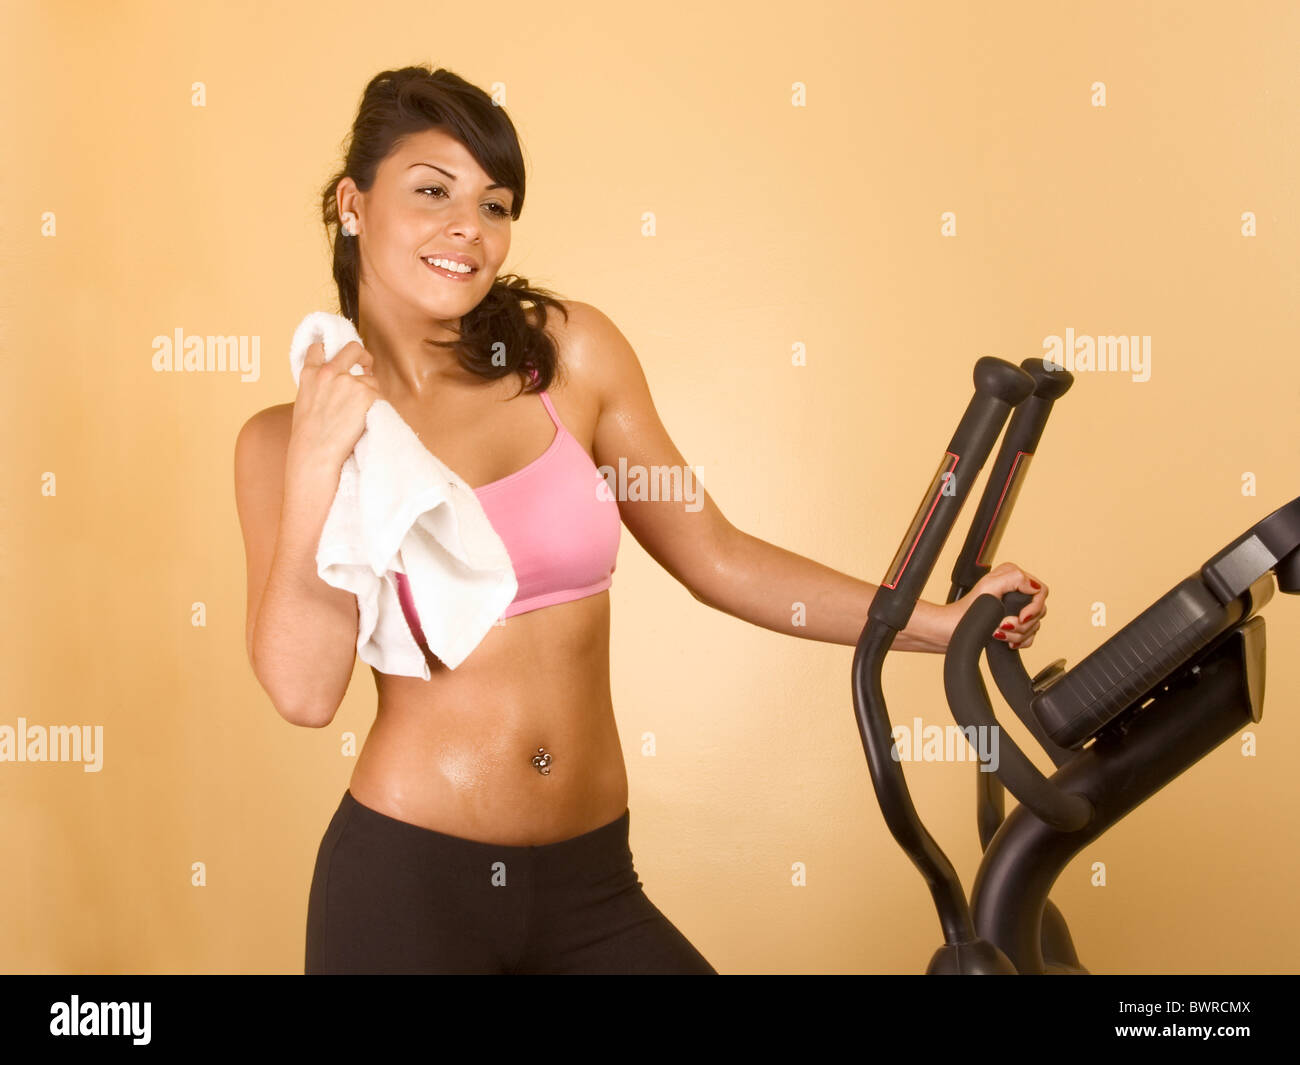 Young woman with towel resting after treadmill work out Stock Photo